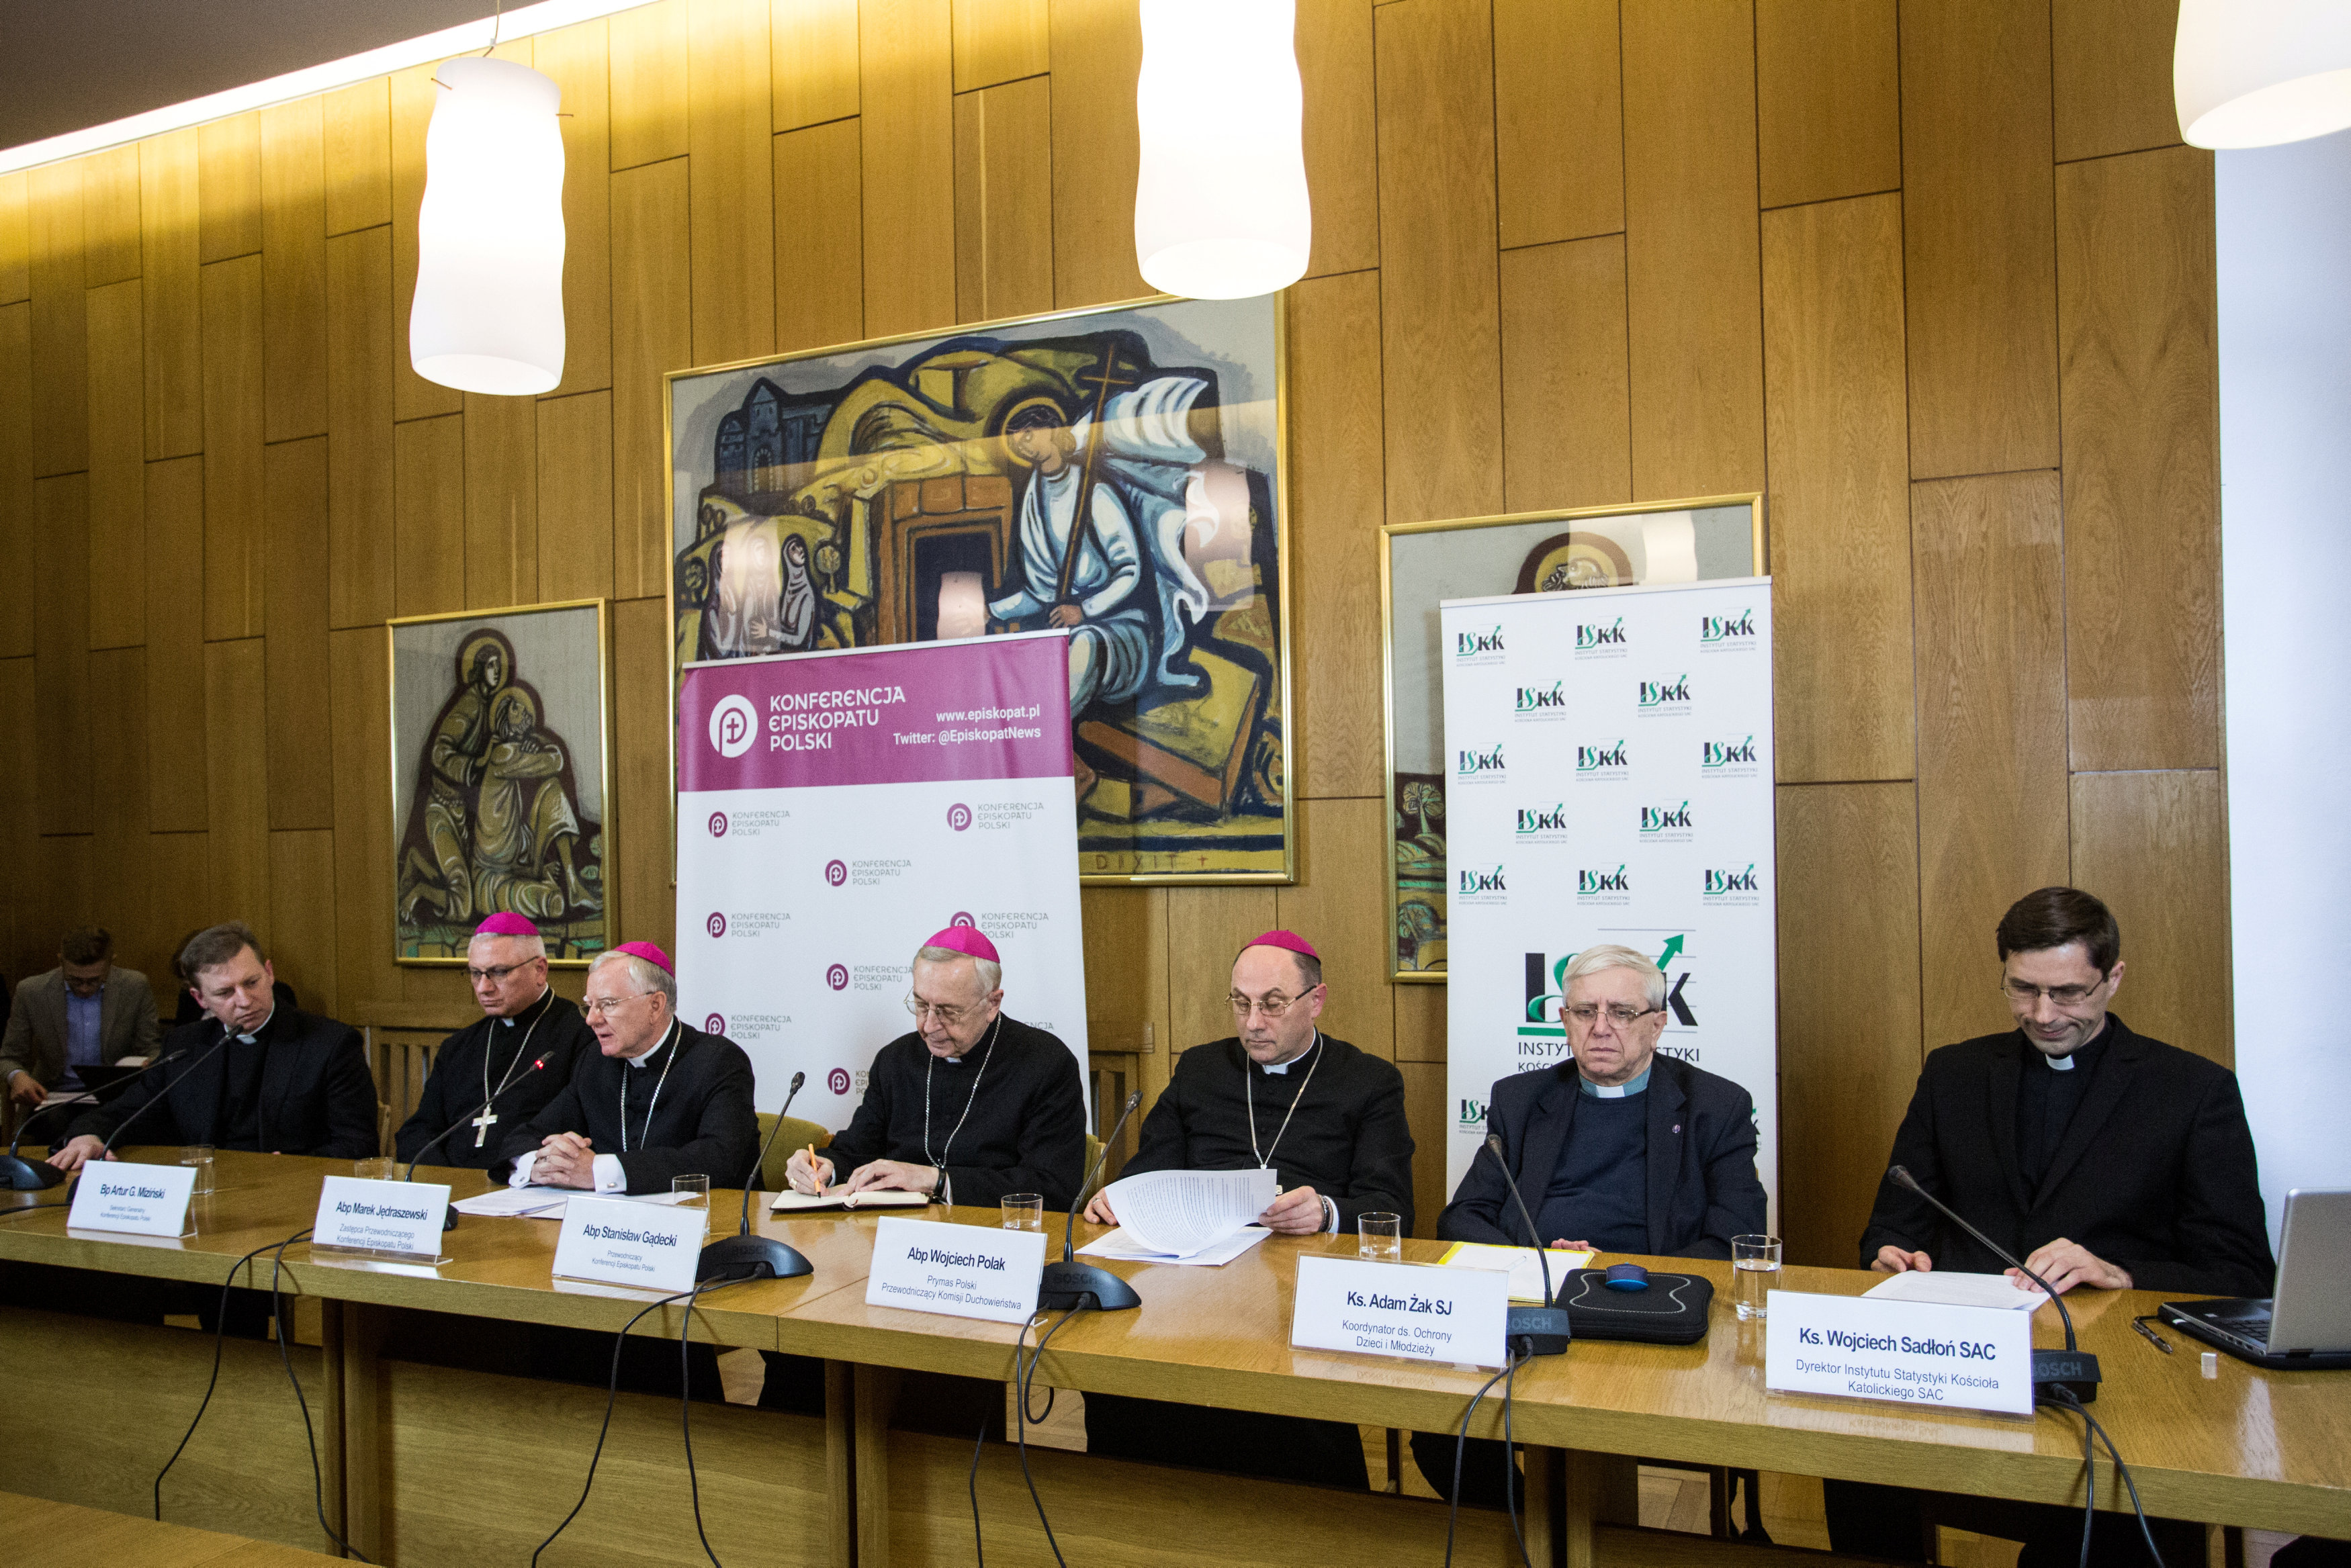 Polish bishops vow to improve child protection after landmark abuse report  